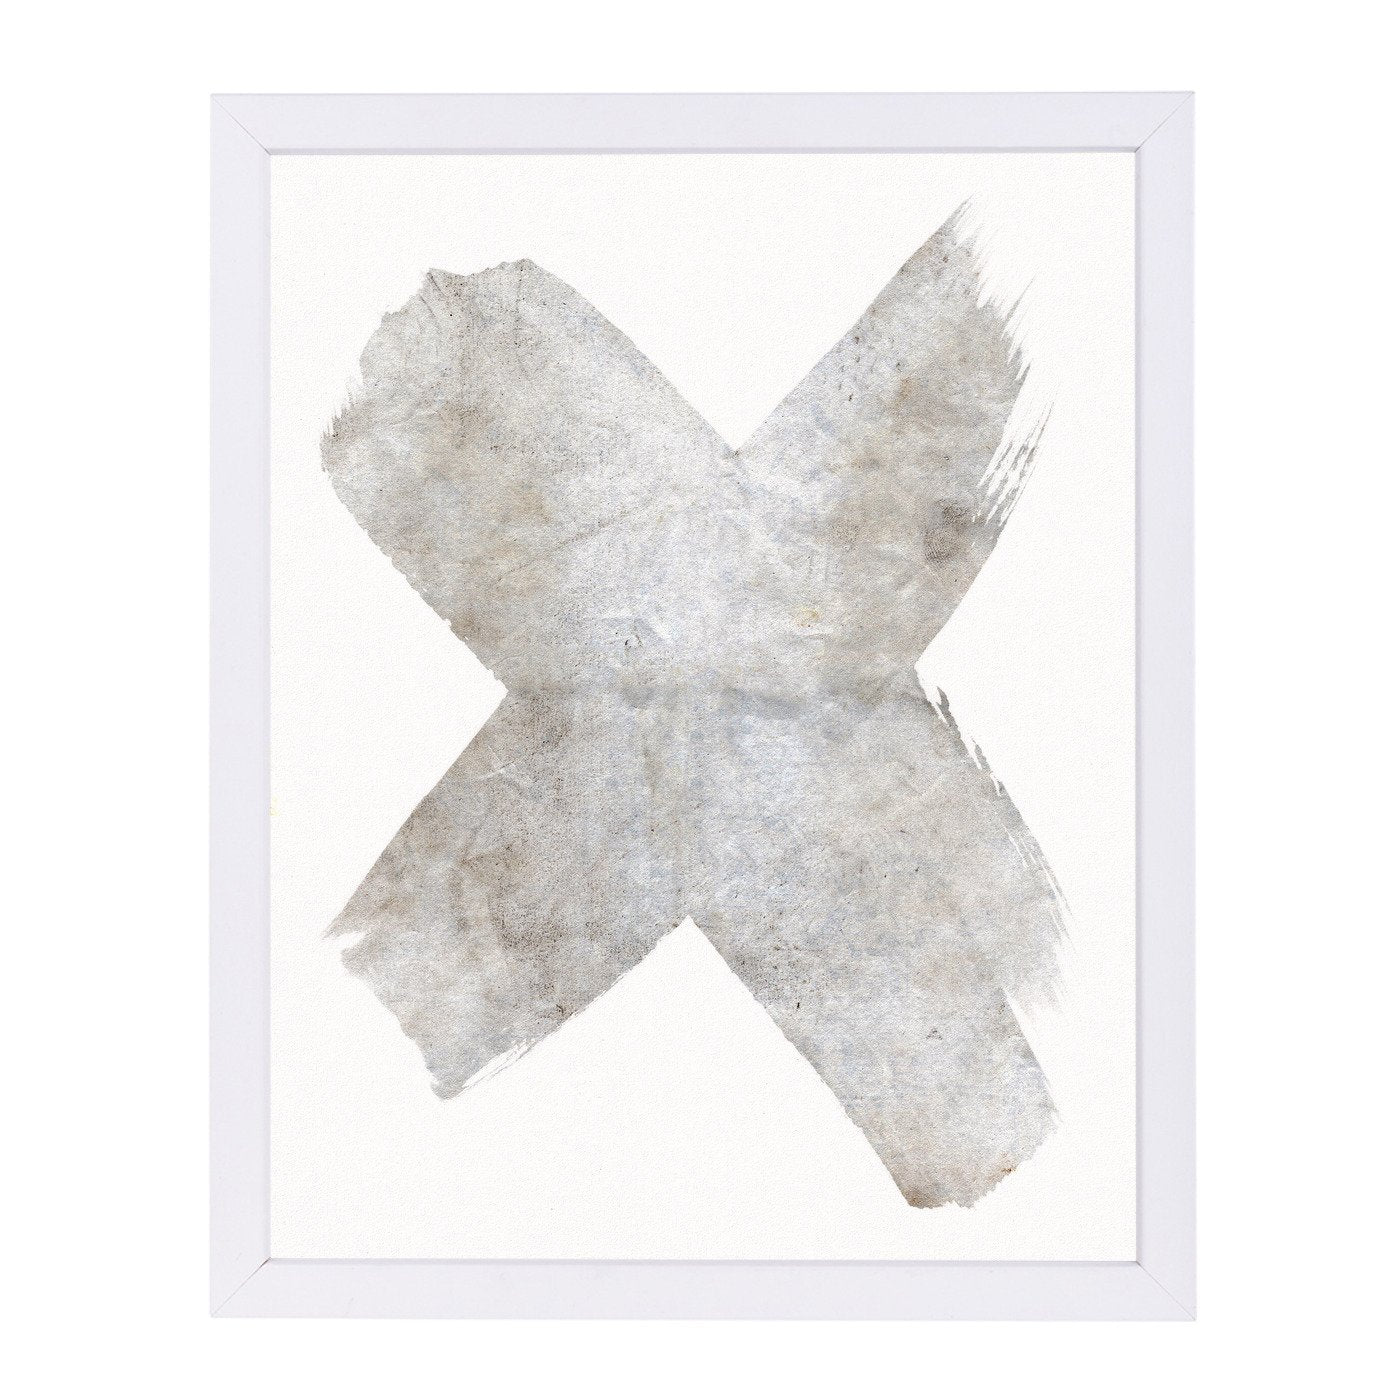 Concrete Paperx By Chaos & Wonder Design - Framed Print - Americanflat